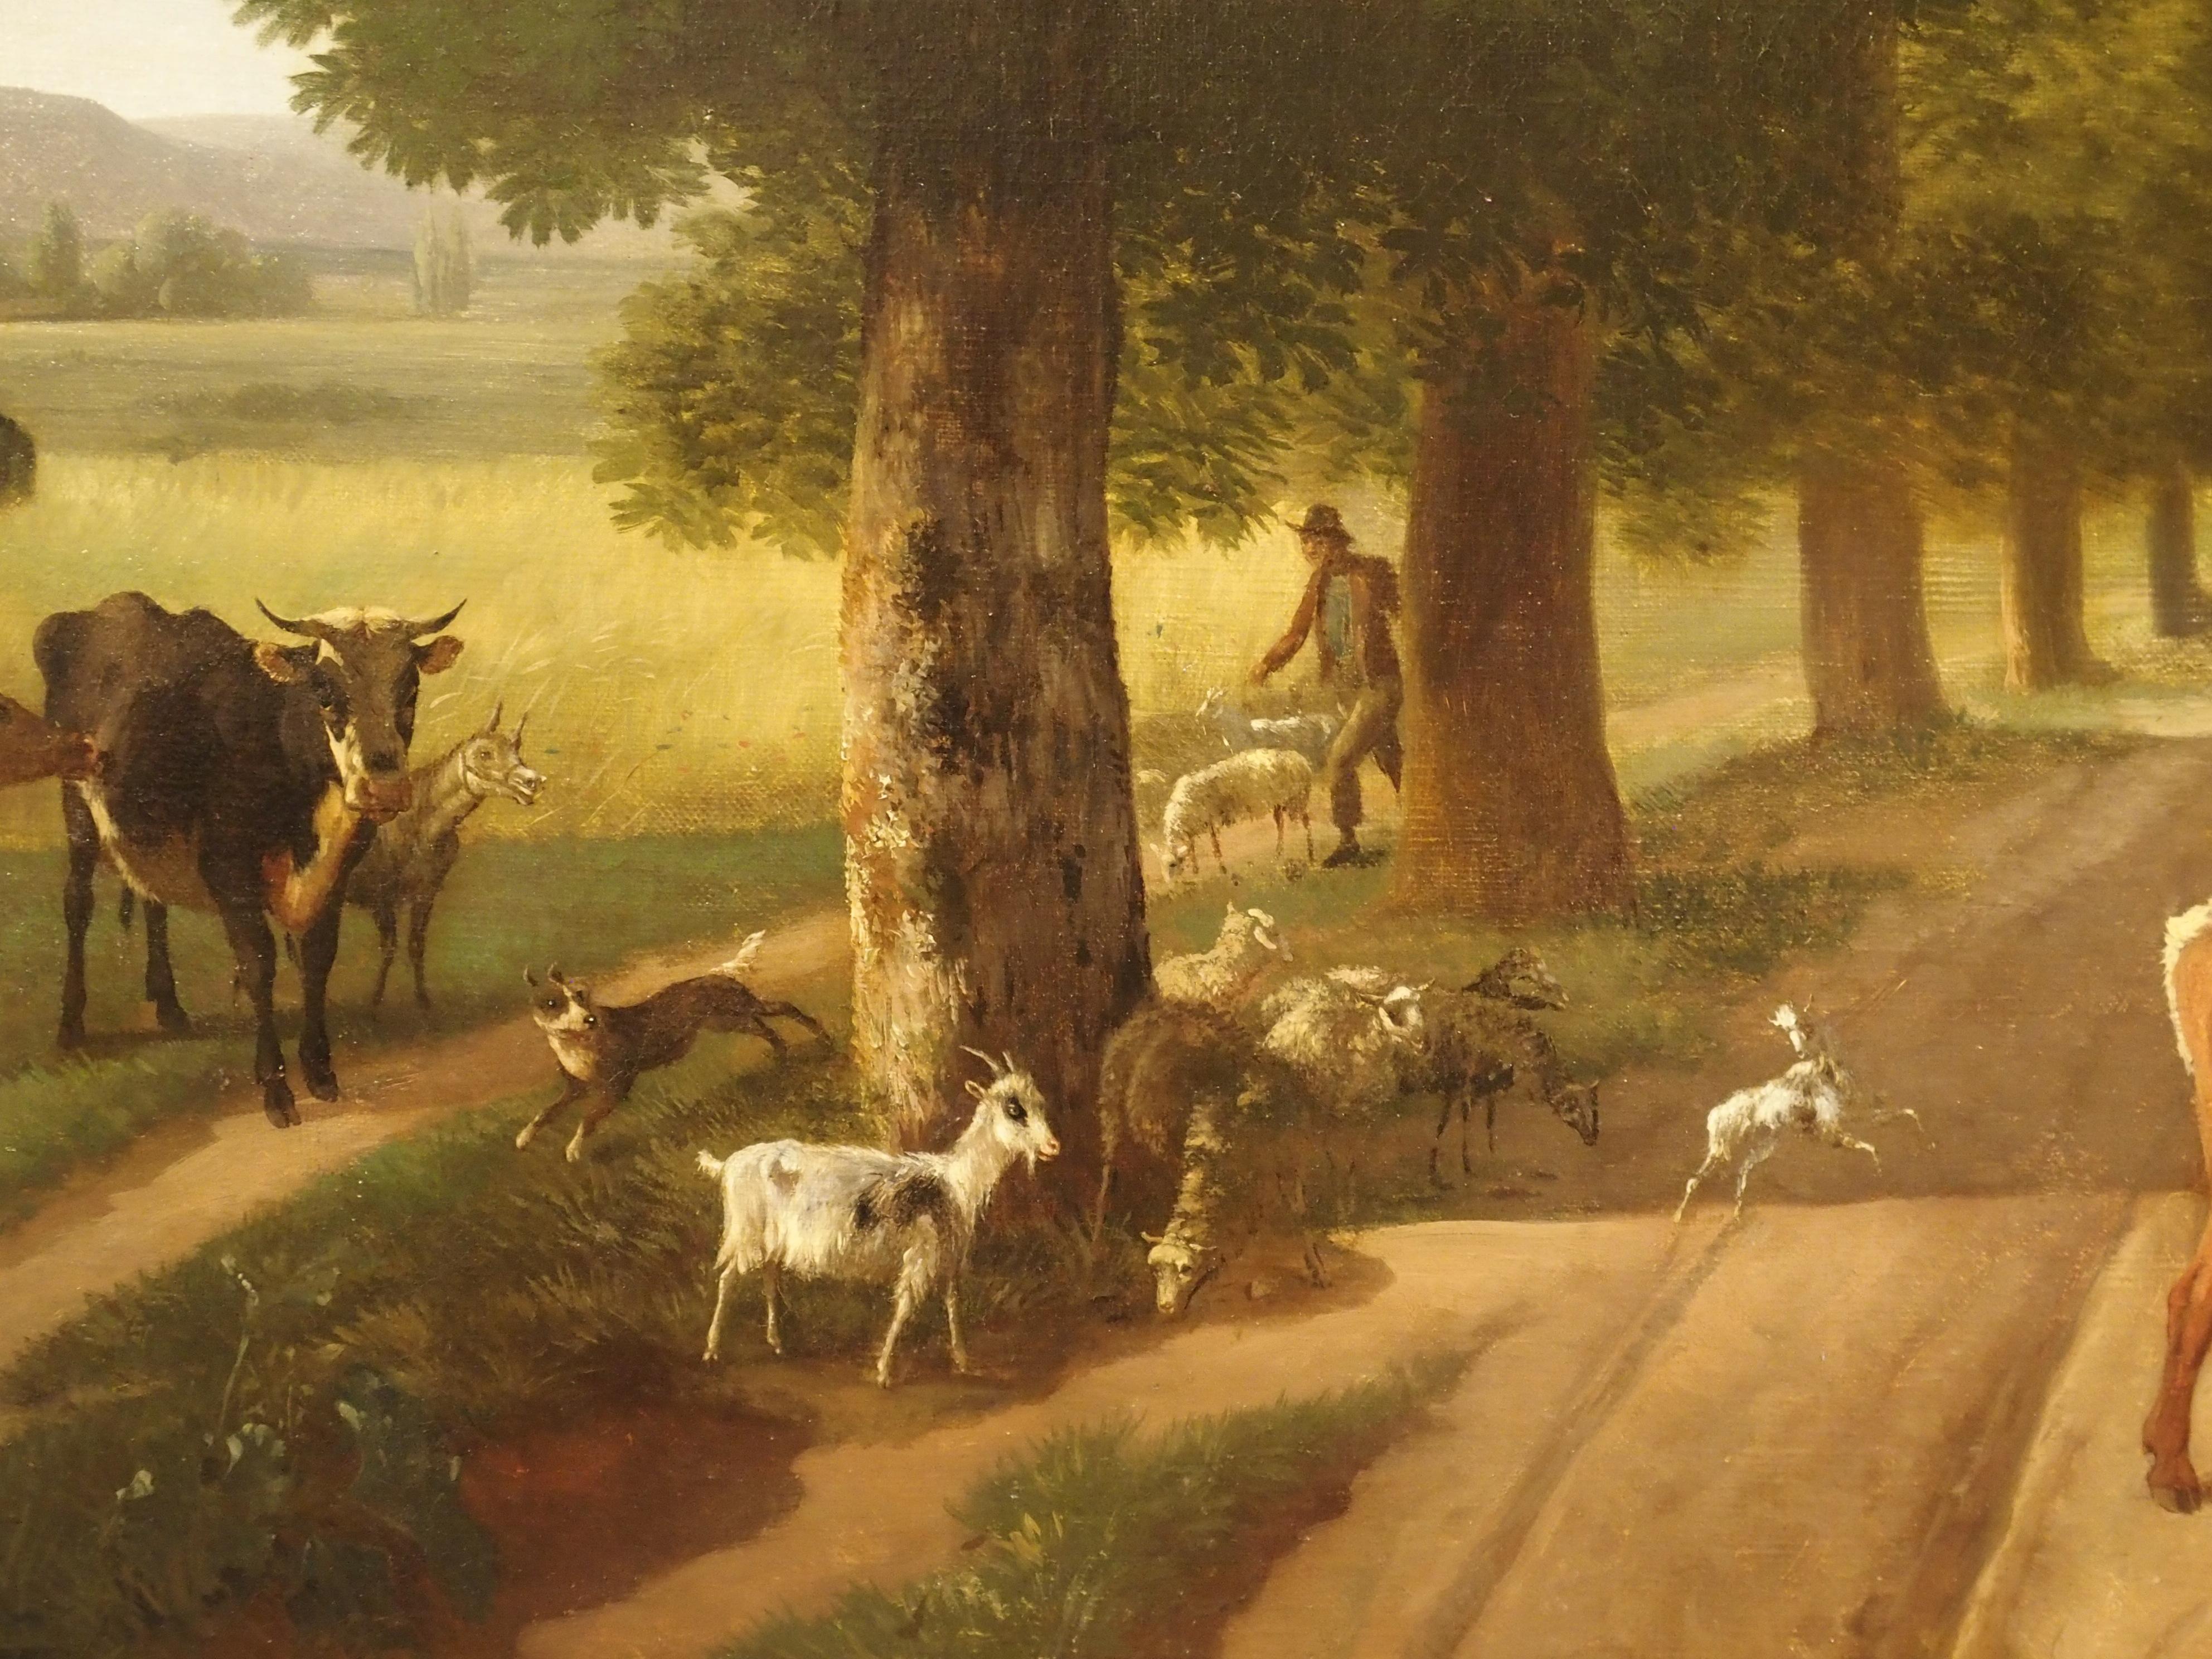 This large and colorful French oil on canvas painting from the 19th century is titled Le Retour a La Ferme, or “Return to the Farm”.

Rural life is the theme of this quaint pastoral scene. A row of trees lines a cobblestoned street outside of a